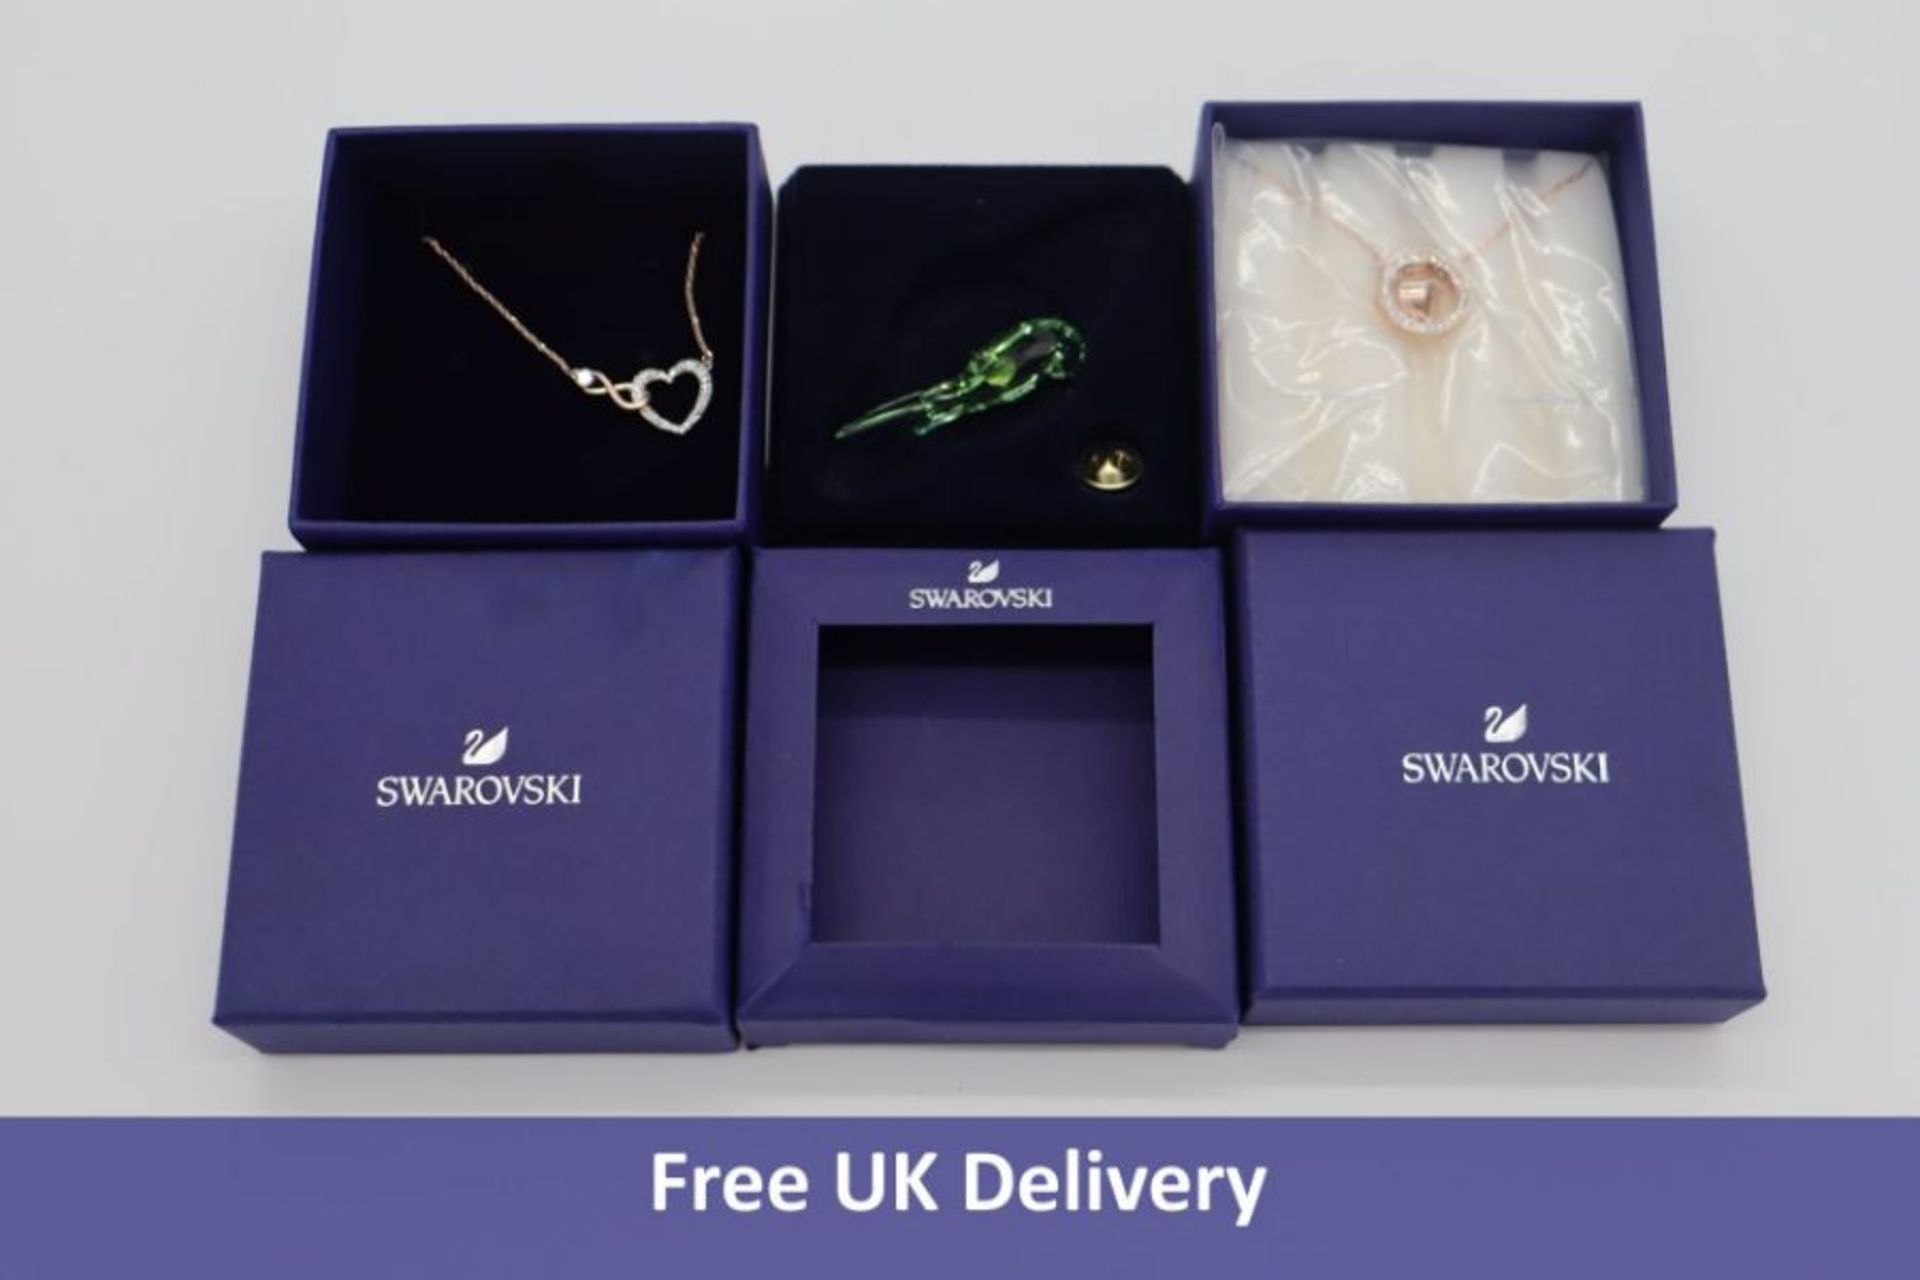 Three items of Swarovski Jewellery to include 1x Hollow Rose Gold Plated Pendant, 1x Infinity Heart